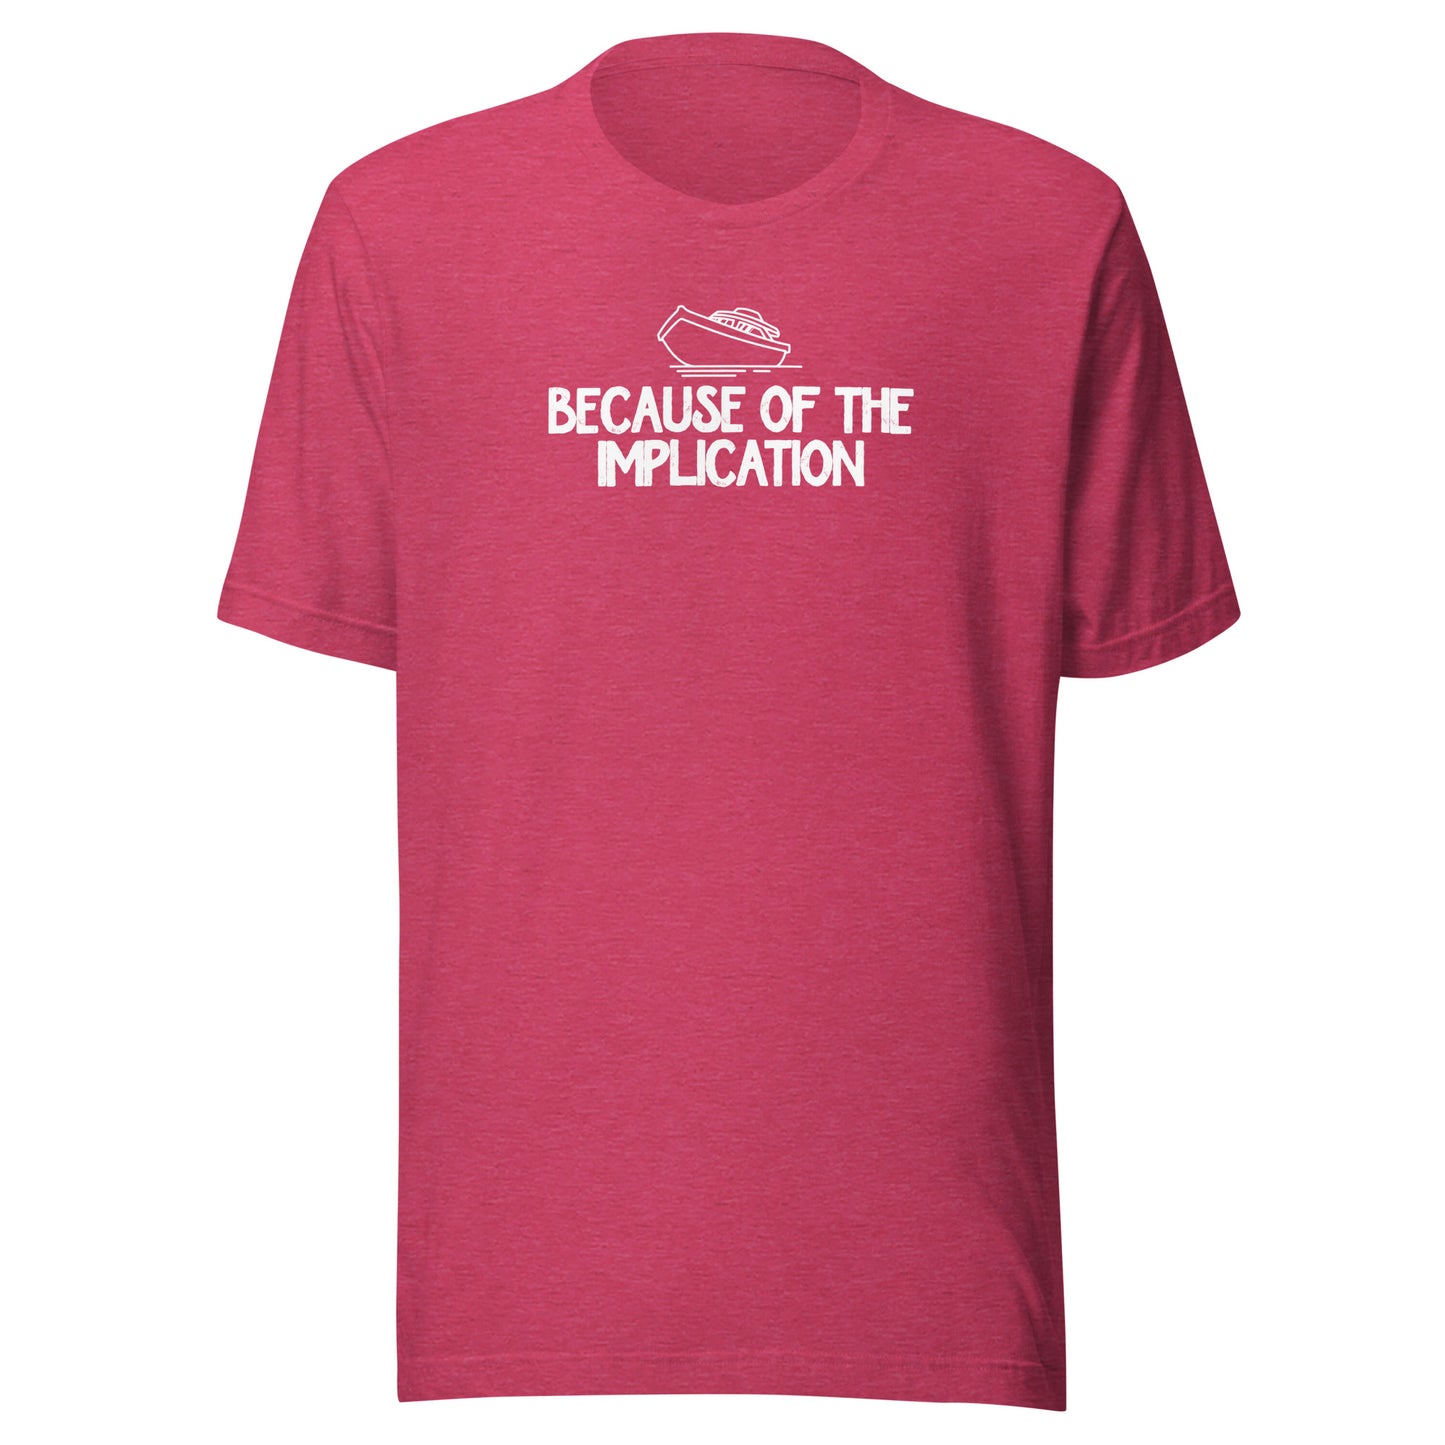 Because of the Implication - Unisex t-shirt